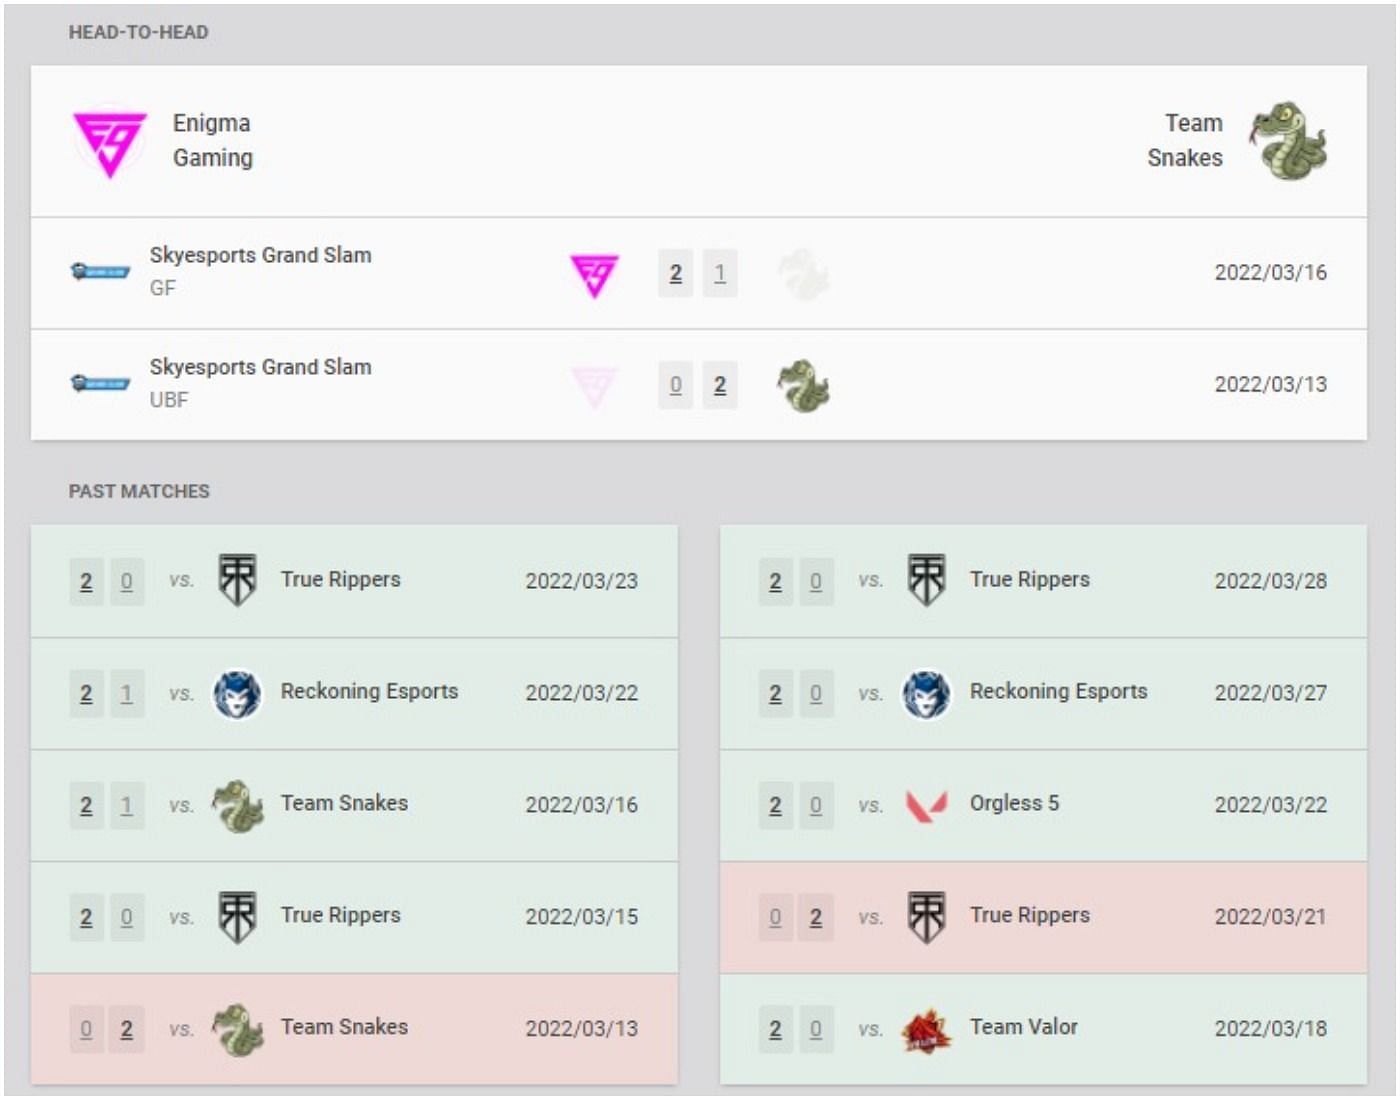 Enigma Gaming and Team Snakes recent results and head-to-head (Image via VLR.gg)